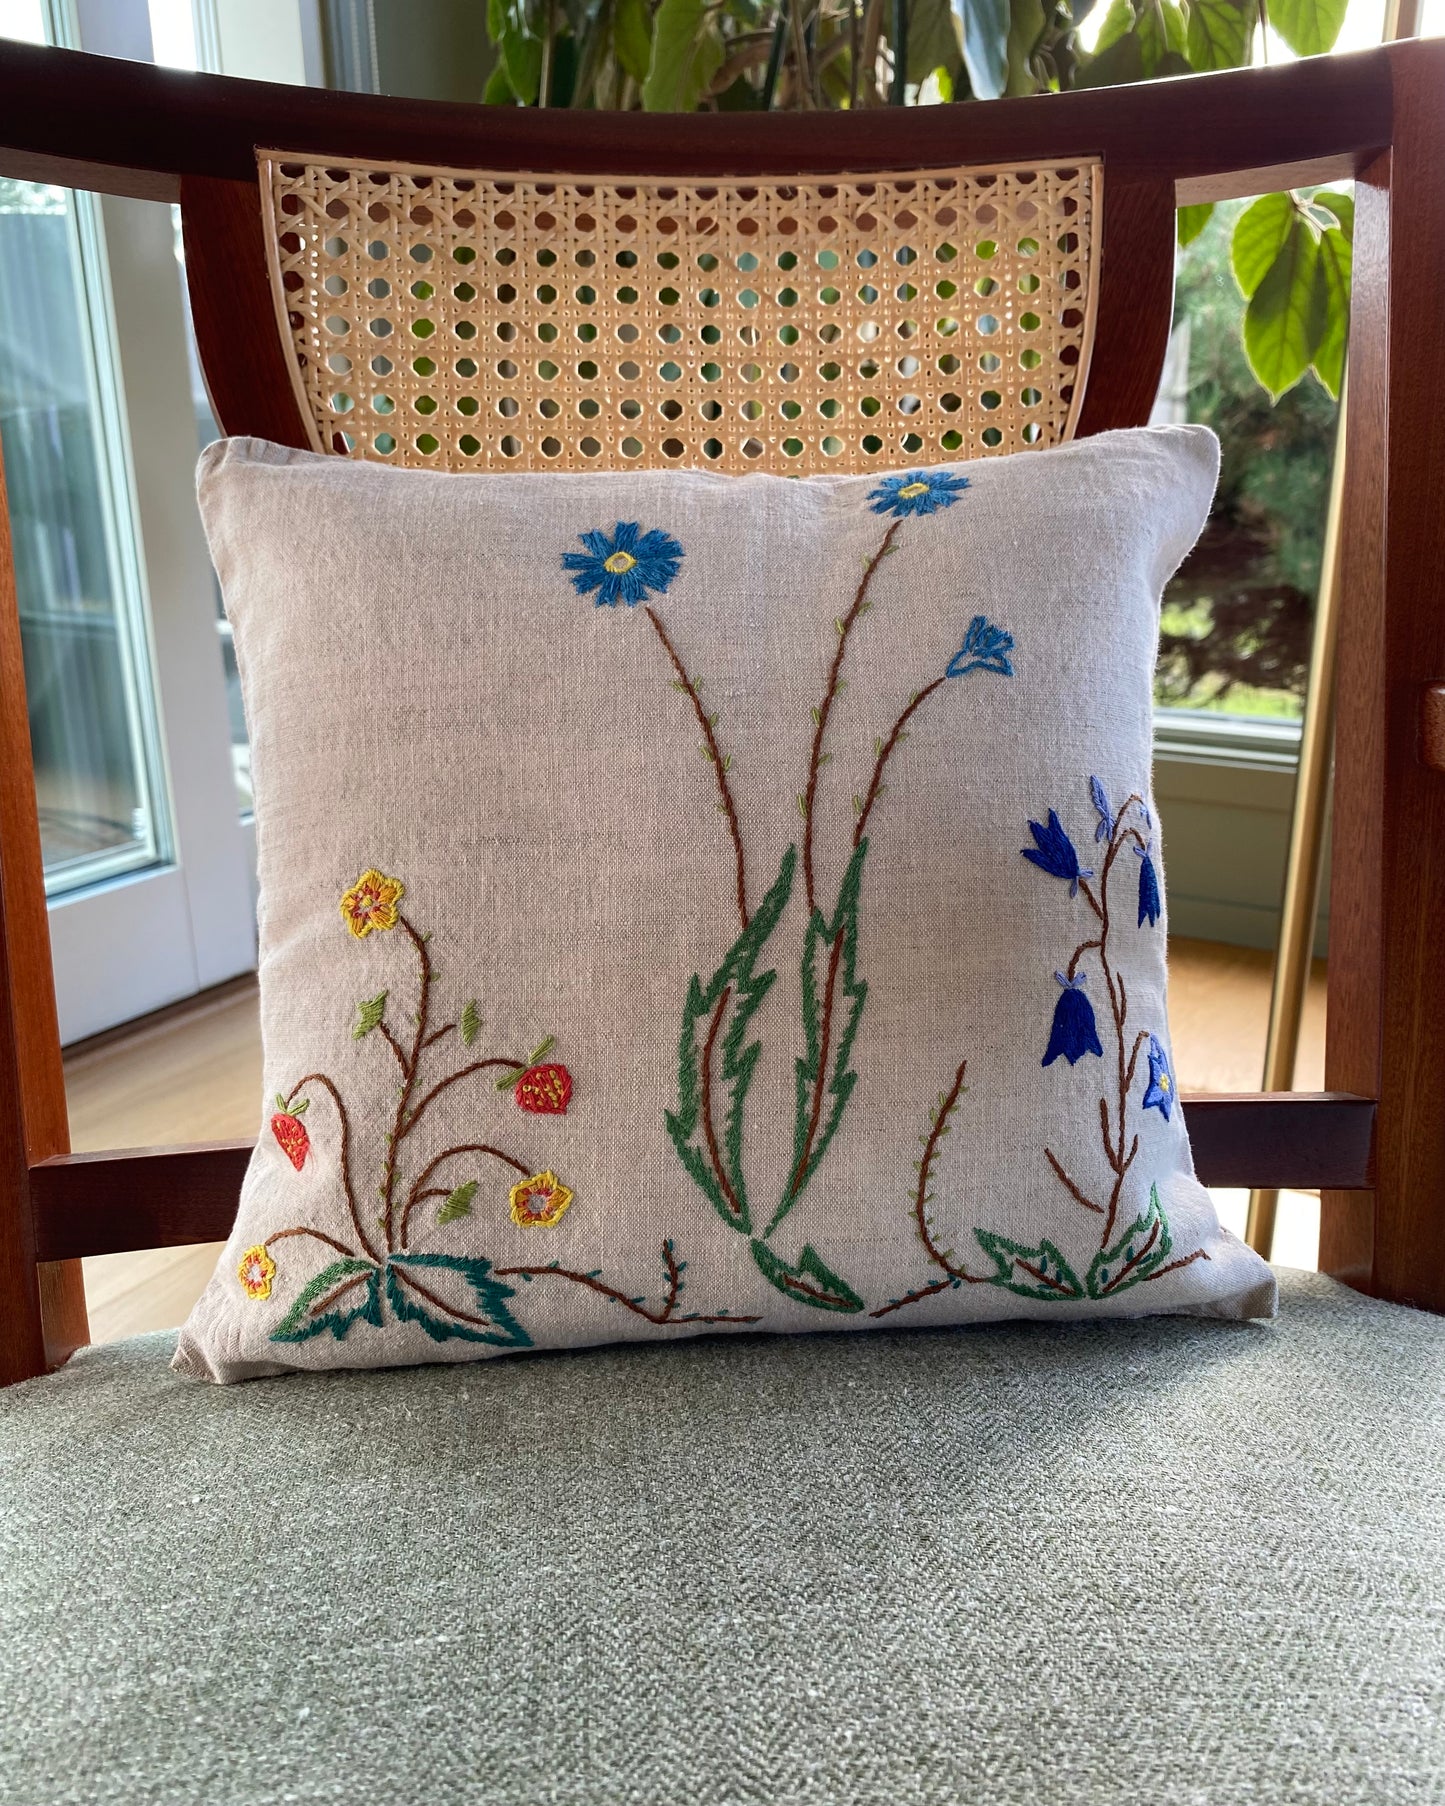 Two hand embroidered cushions